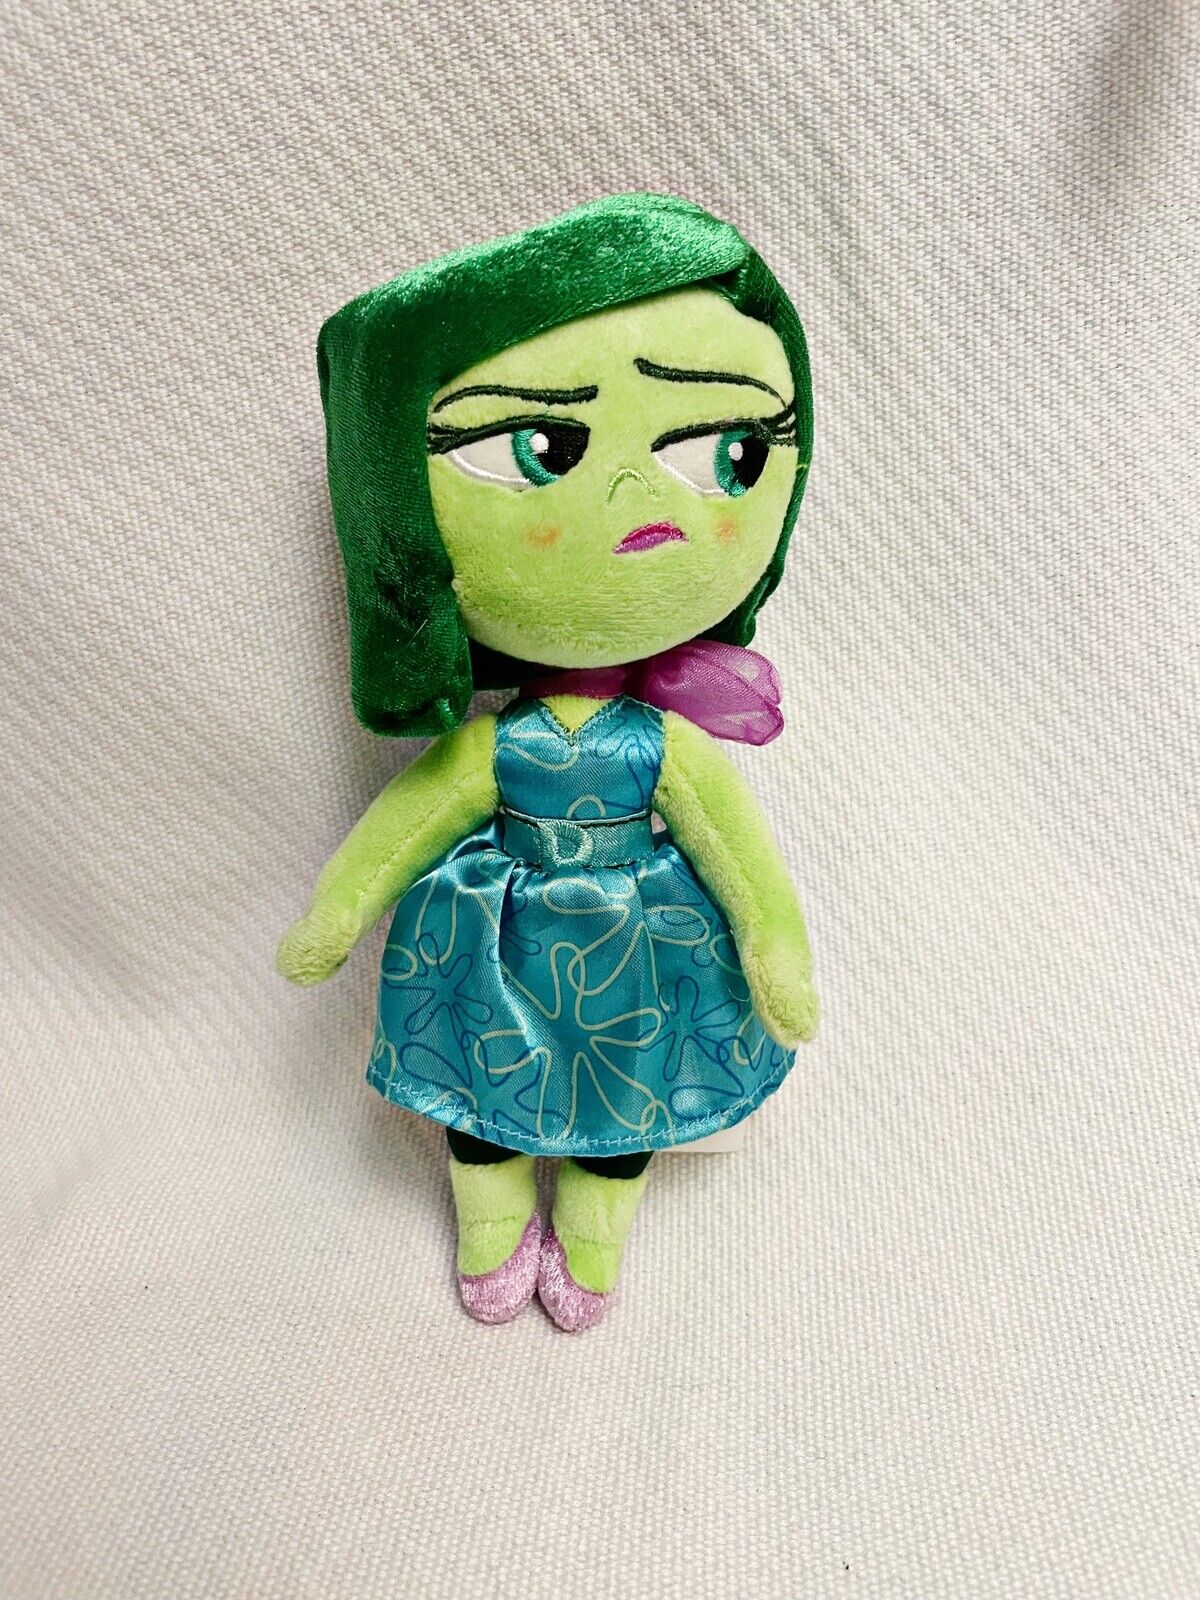 Disney Store Inside Out Green Disgust Plush Stuffed Animal Doll 8”